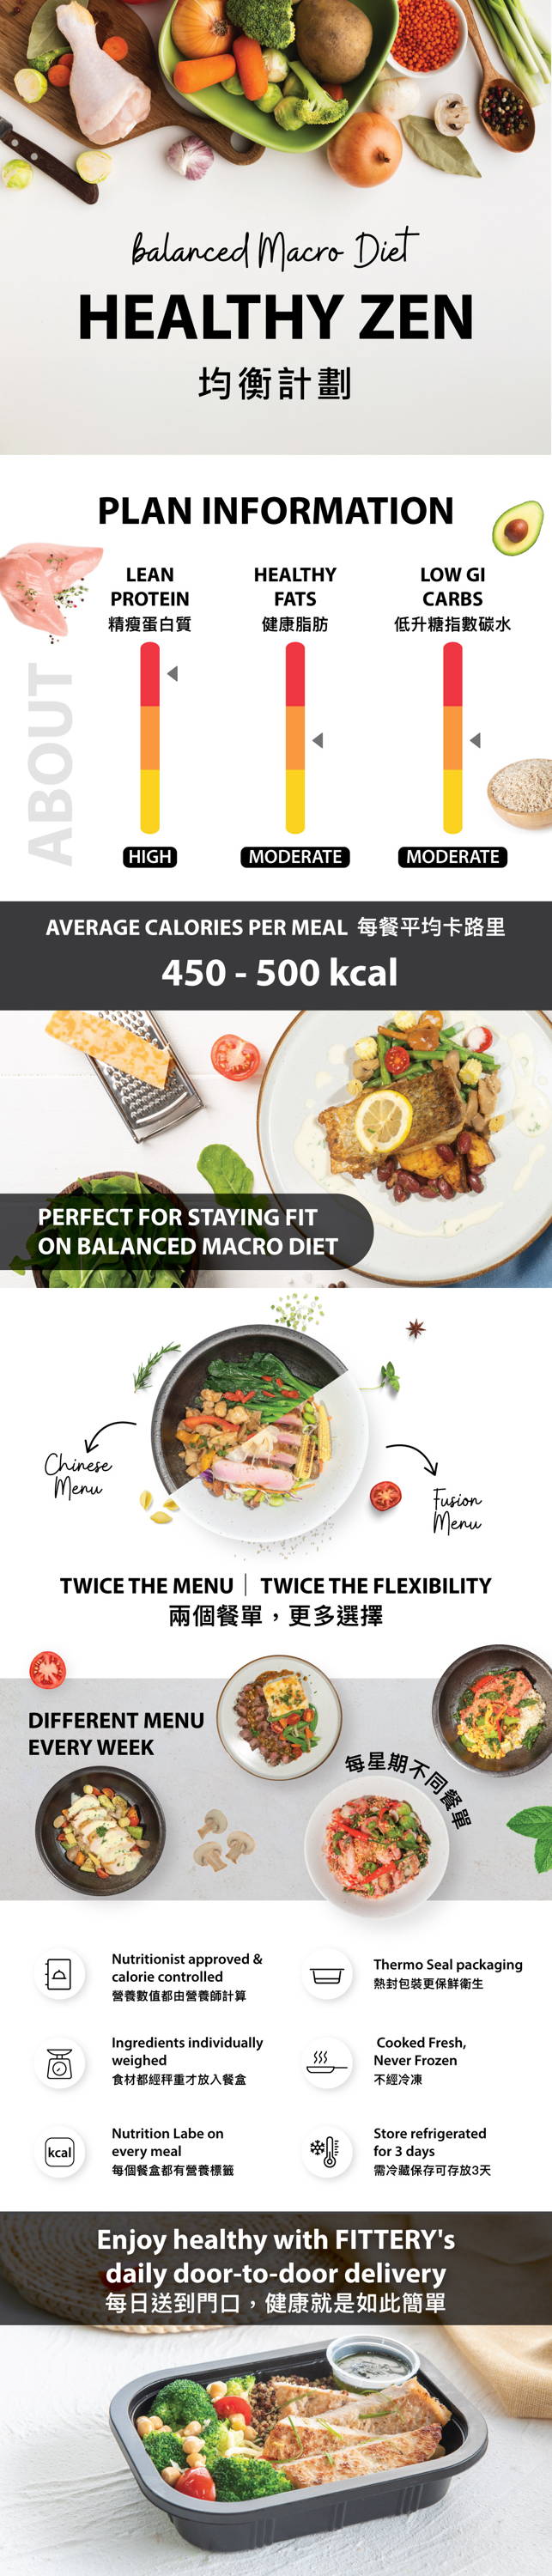 FITTERY Healthy Zen Meal Plan | Perfect for staying fit on balanced macro diet